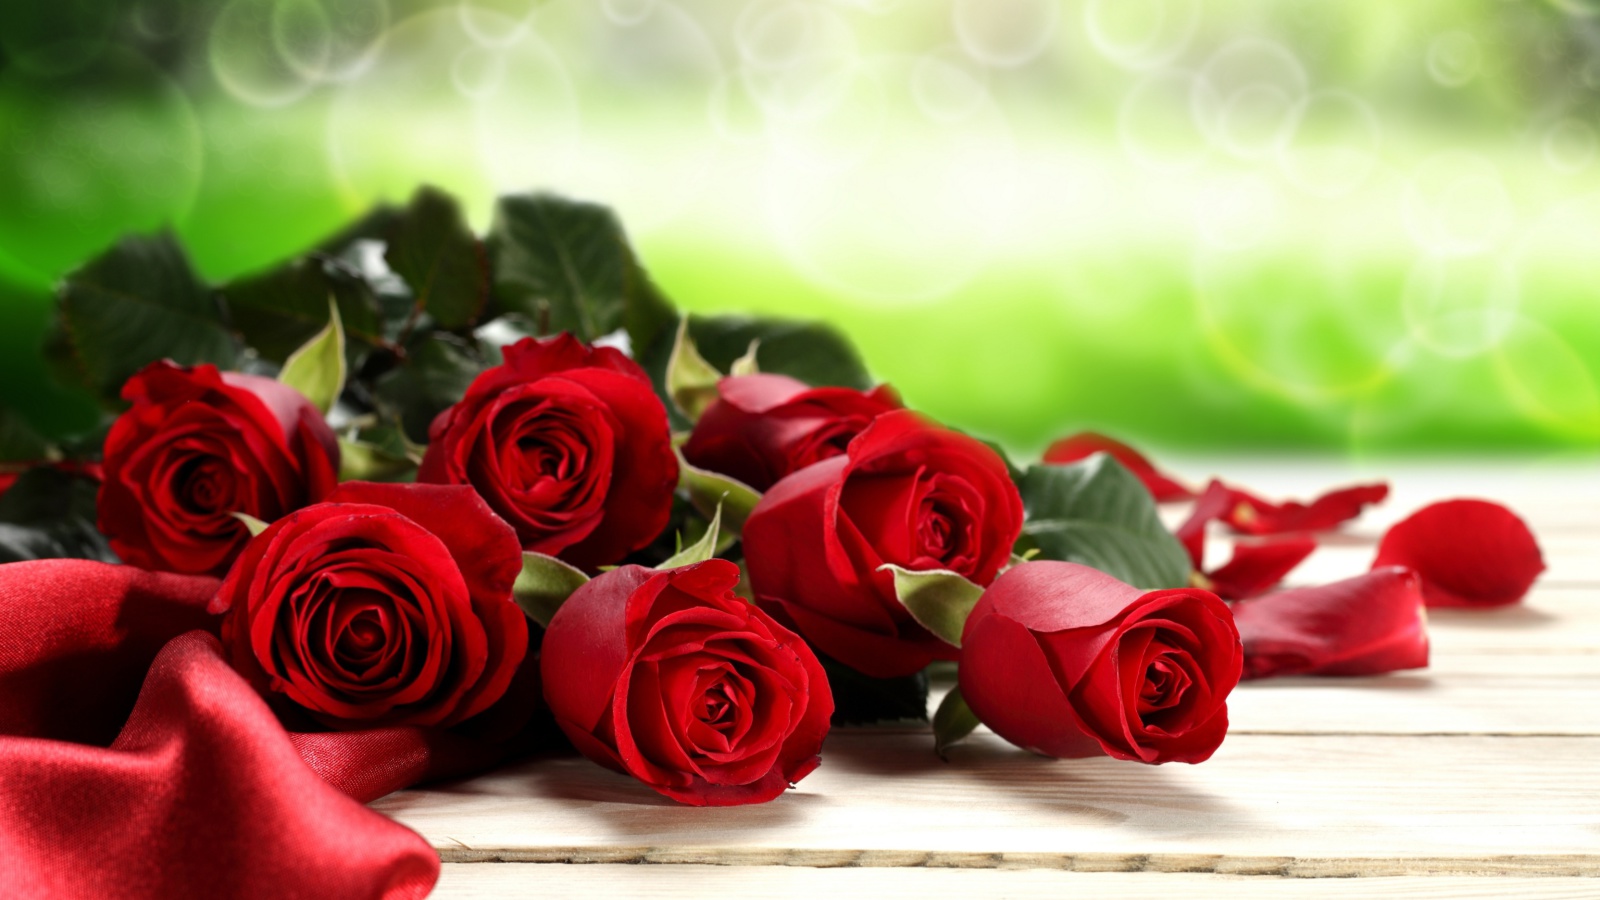 Red Roses for Valentines Day wallpaper 1600x900